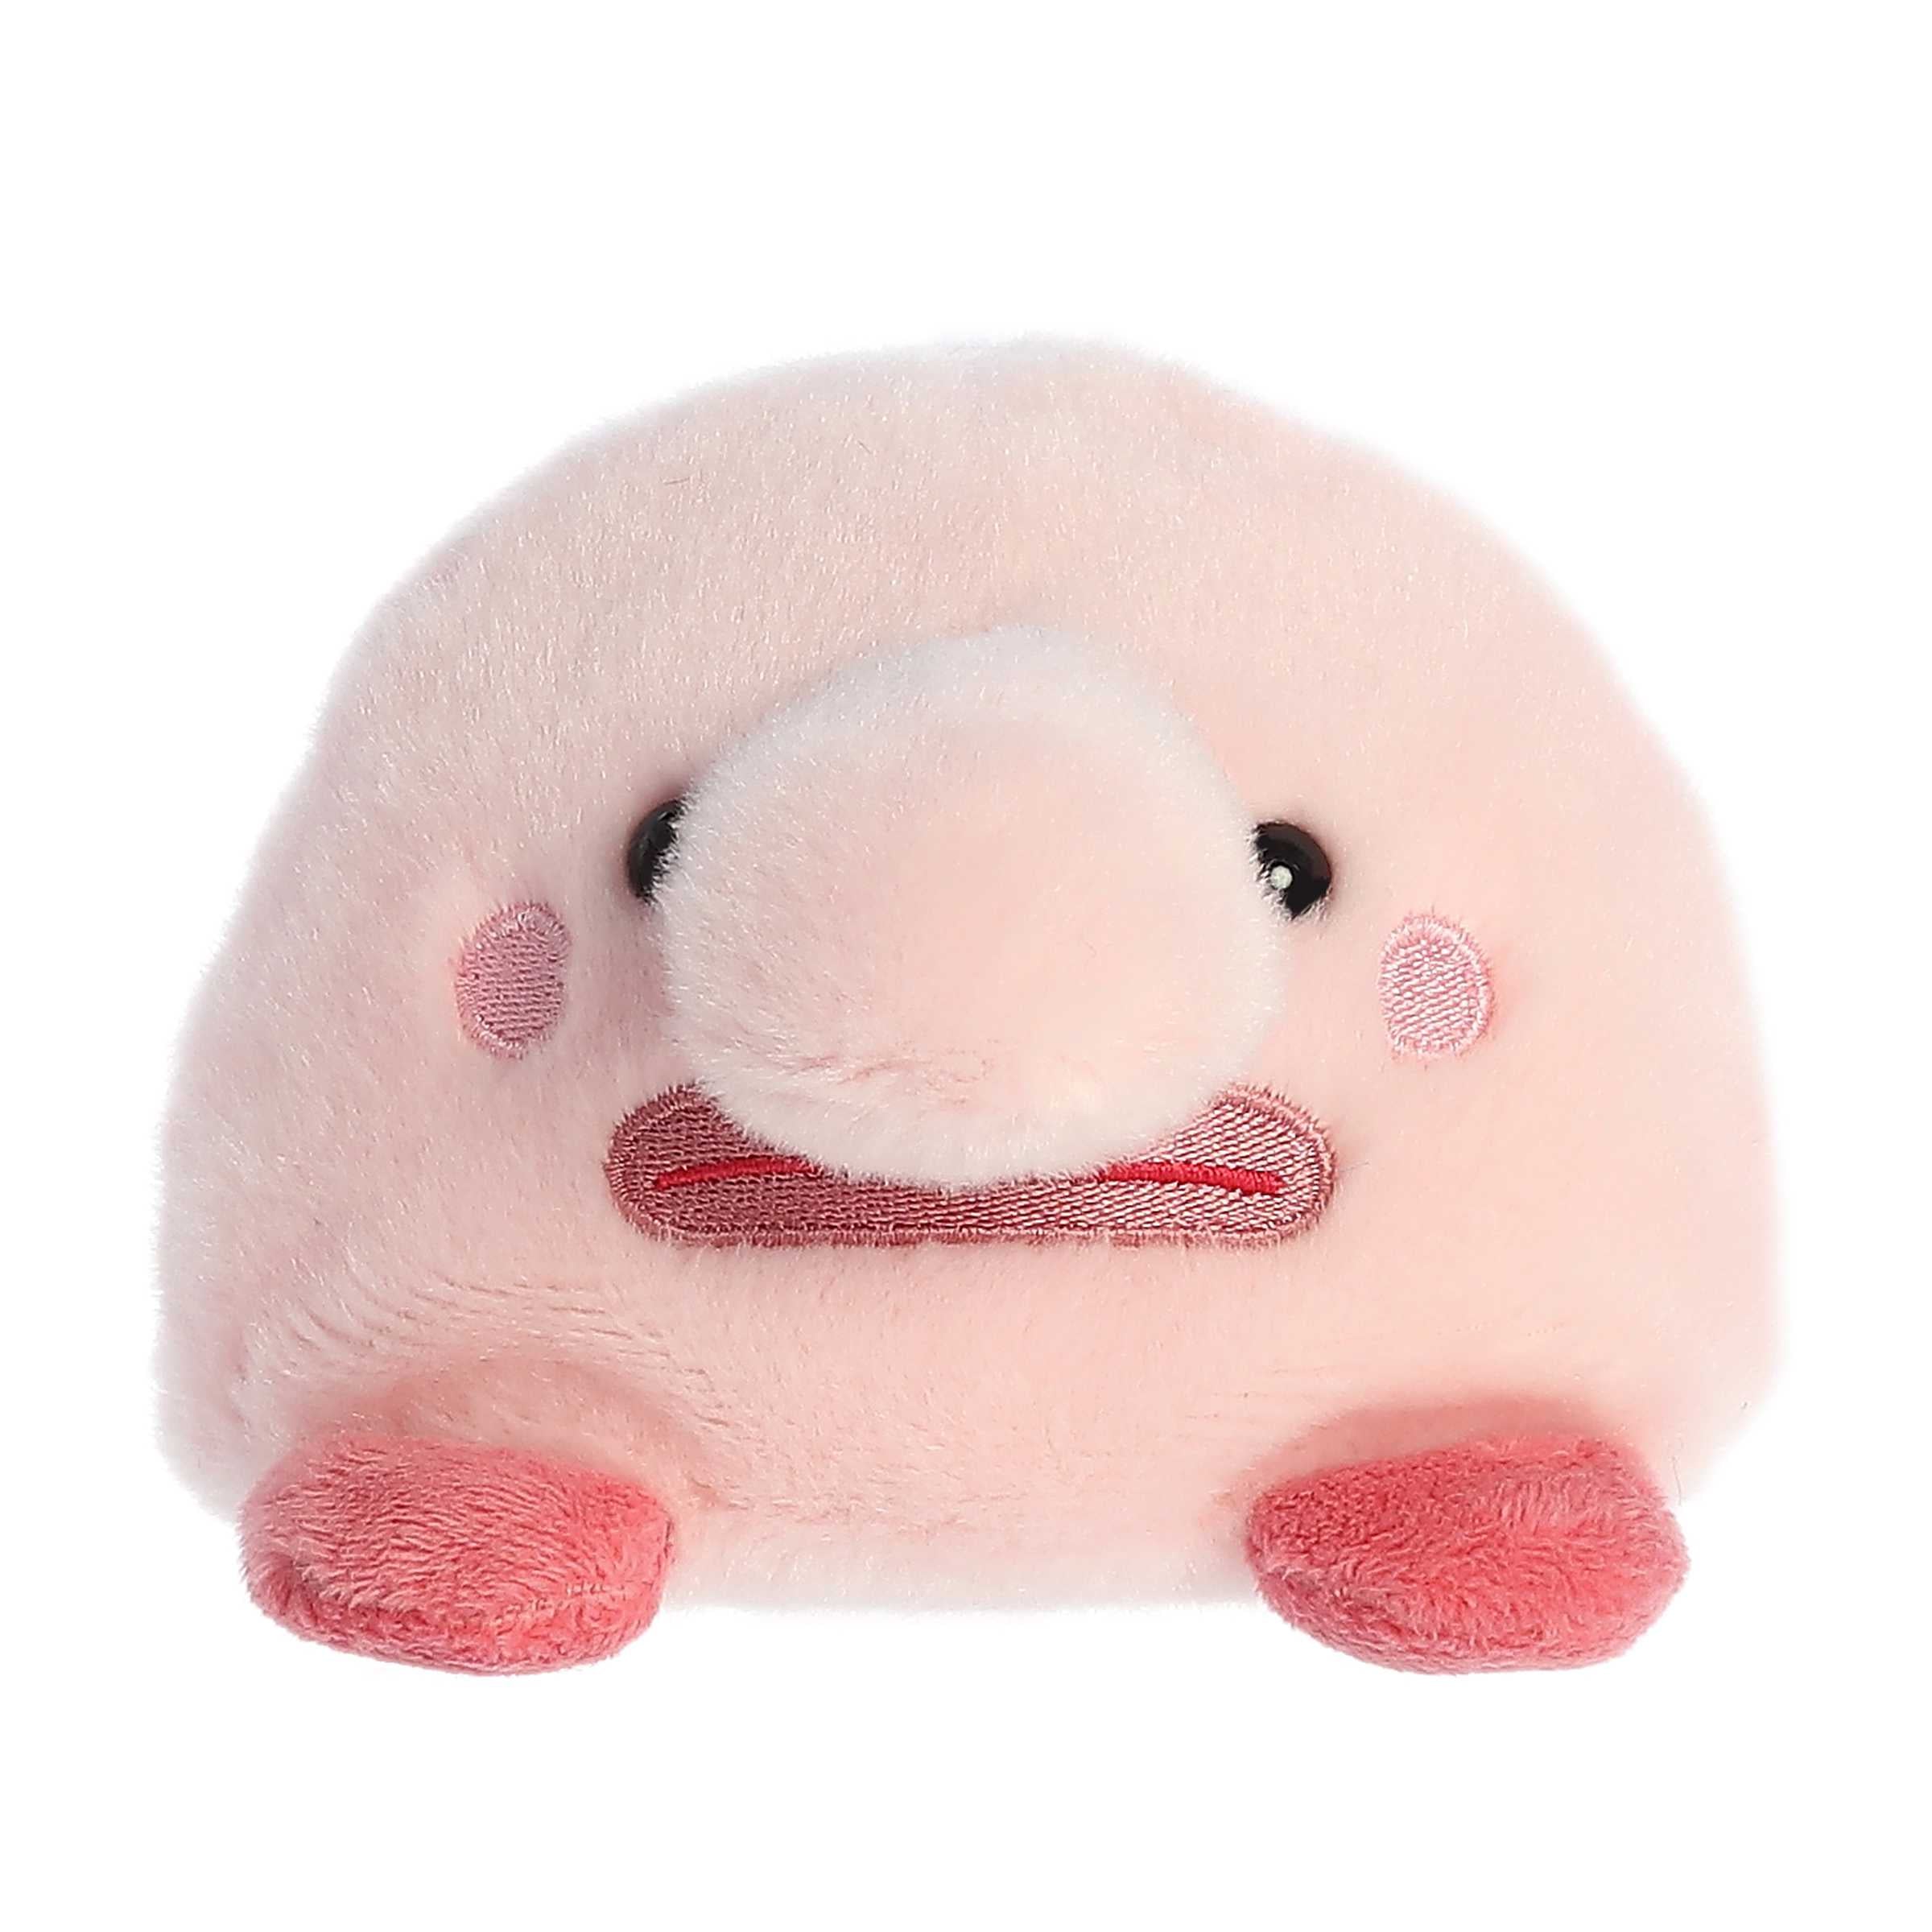 A mini adorable blobfish plush with soft pink fur, a bulbous round nose, embroidered blush, and dark pink fins and lips